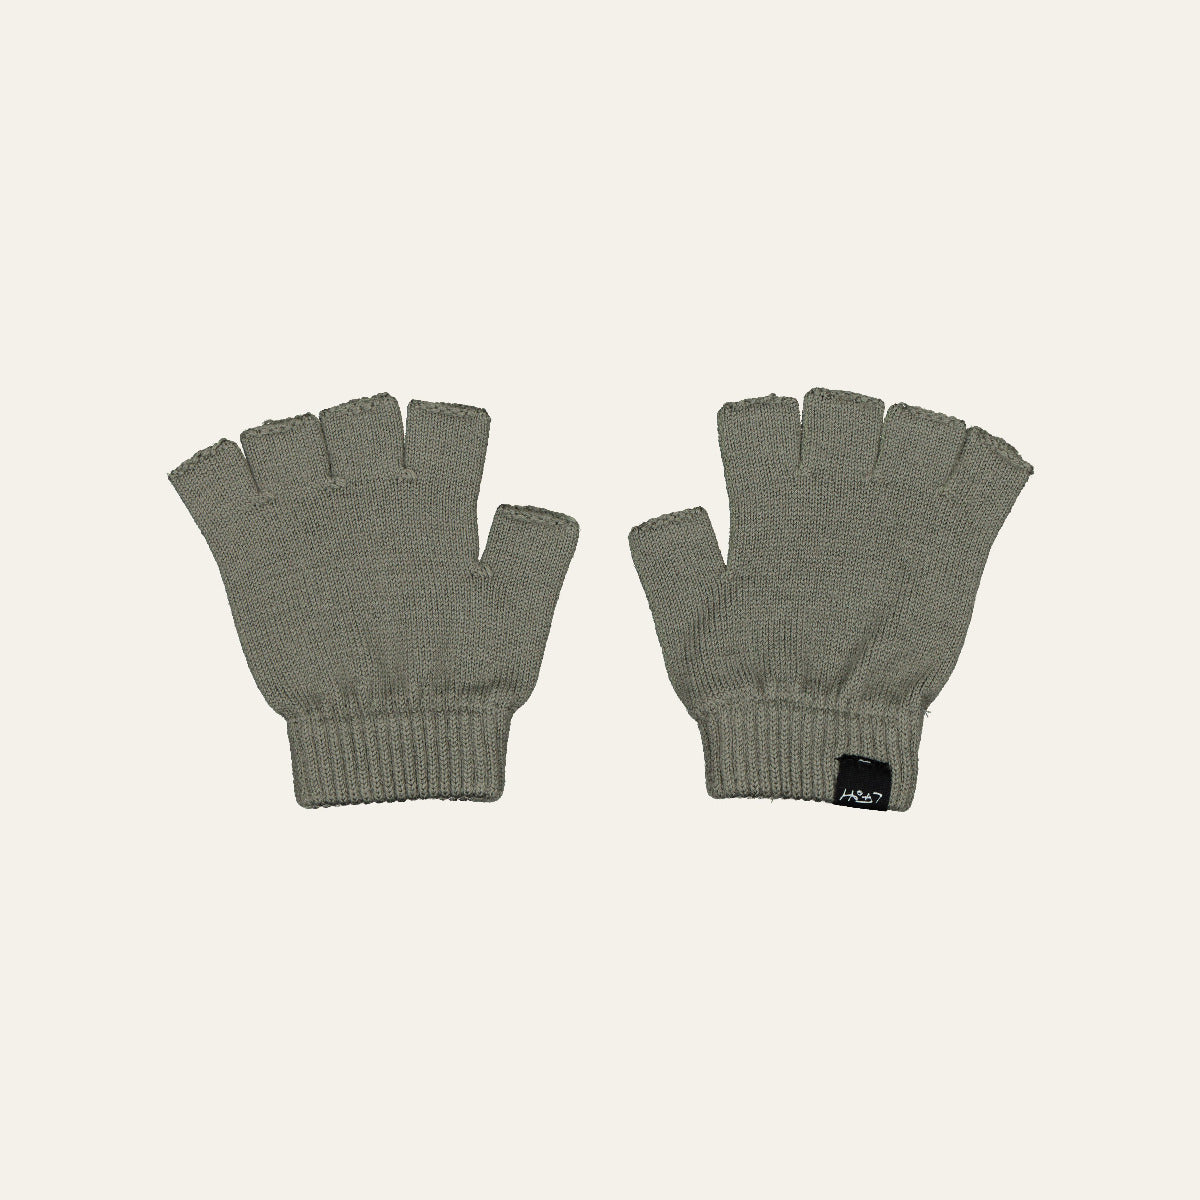 Double Trouble Gloves, Olive